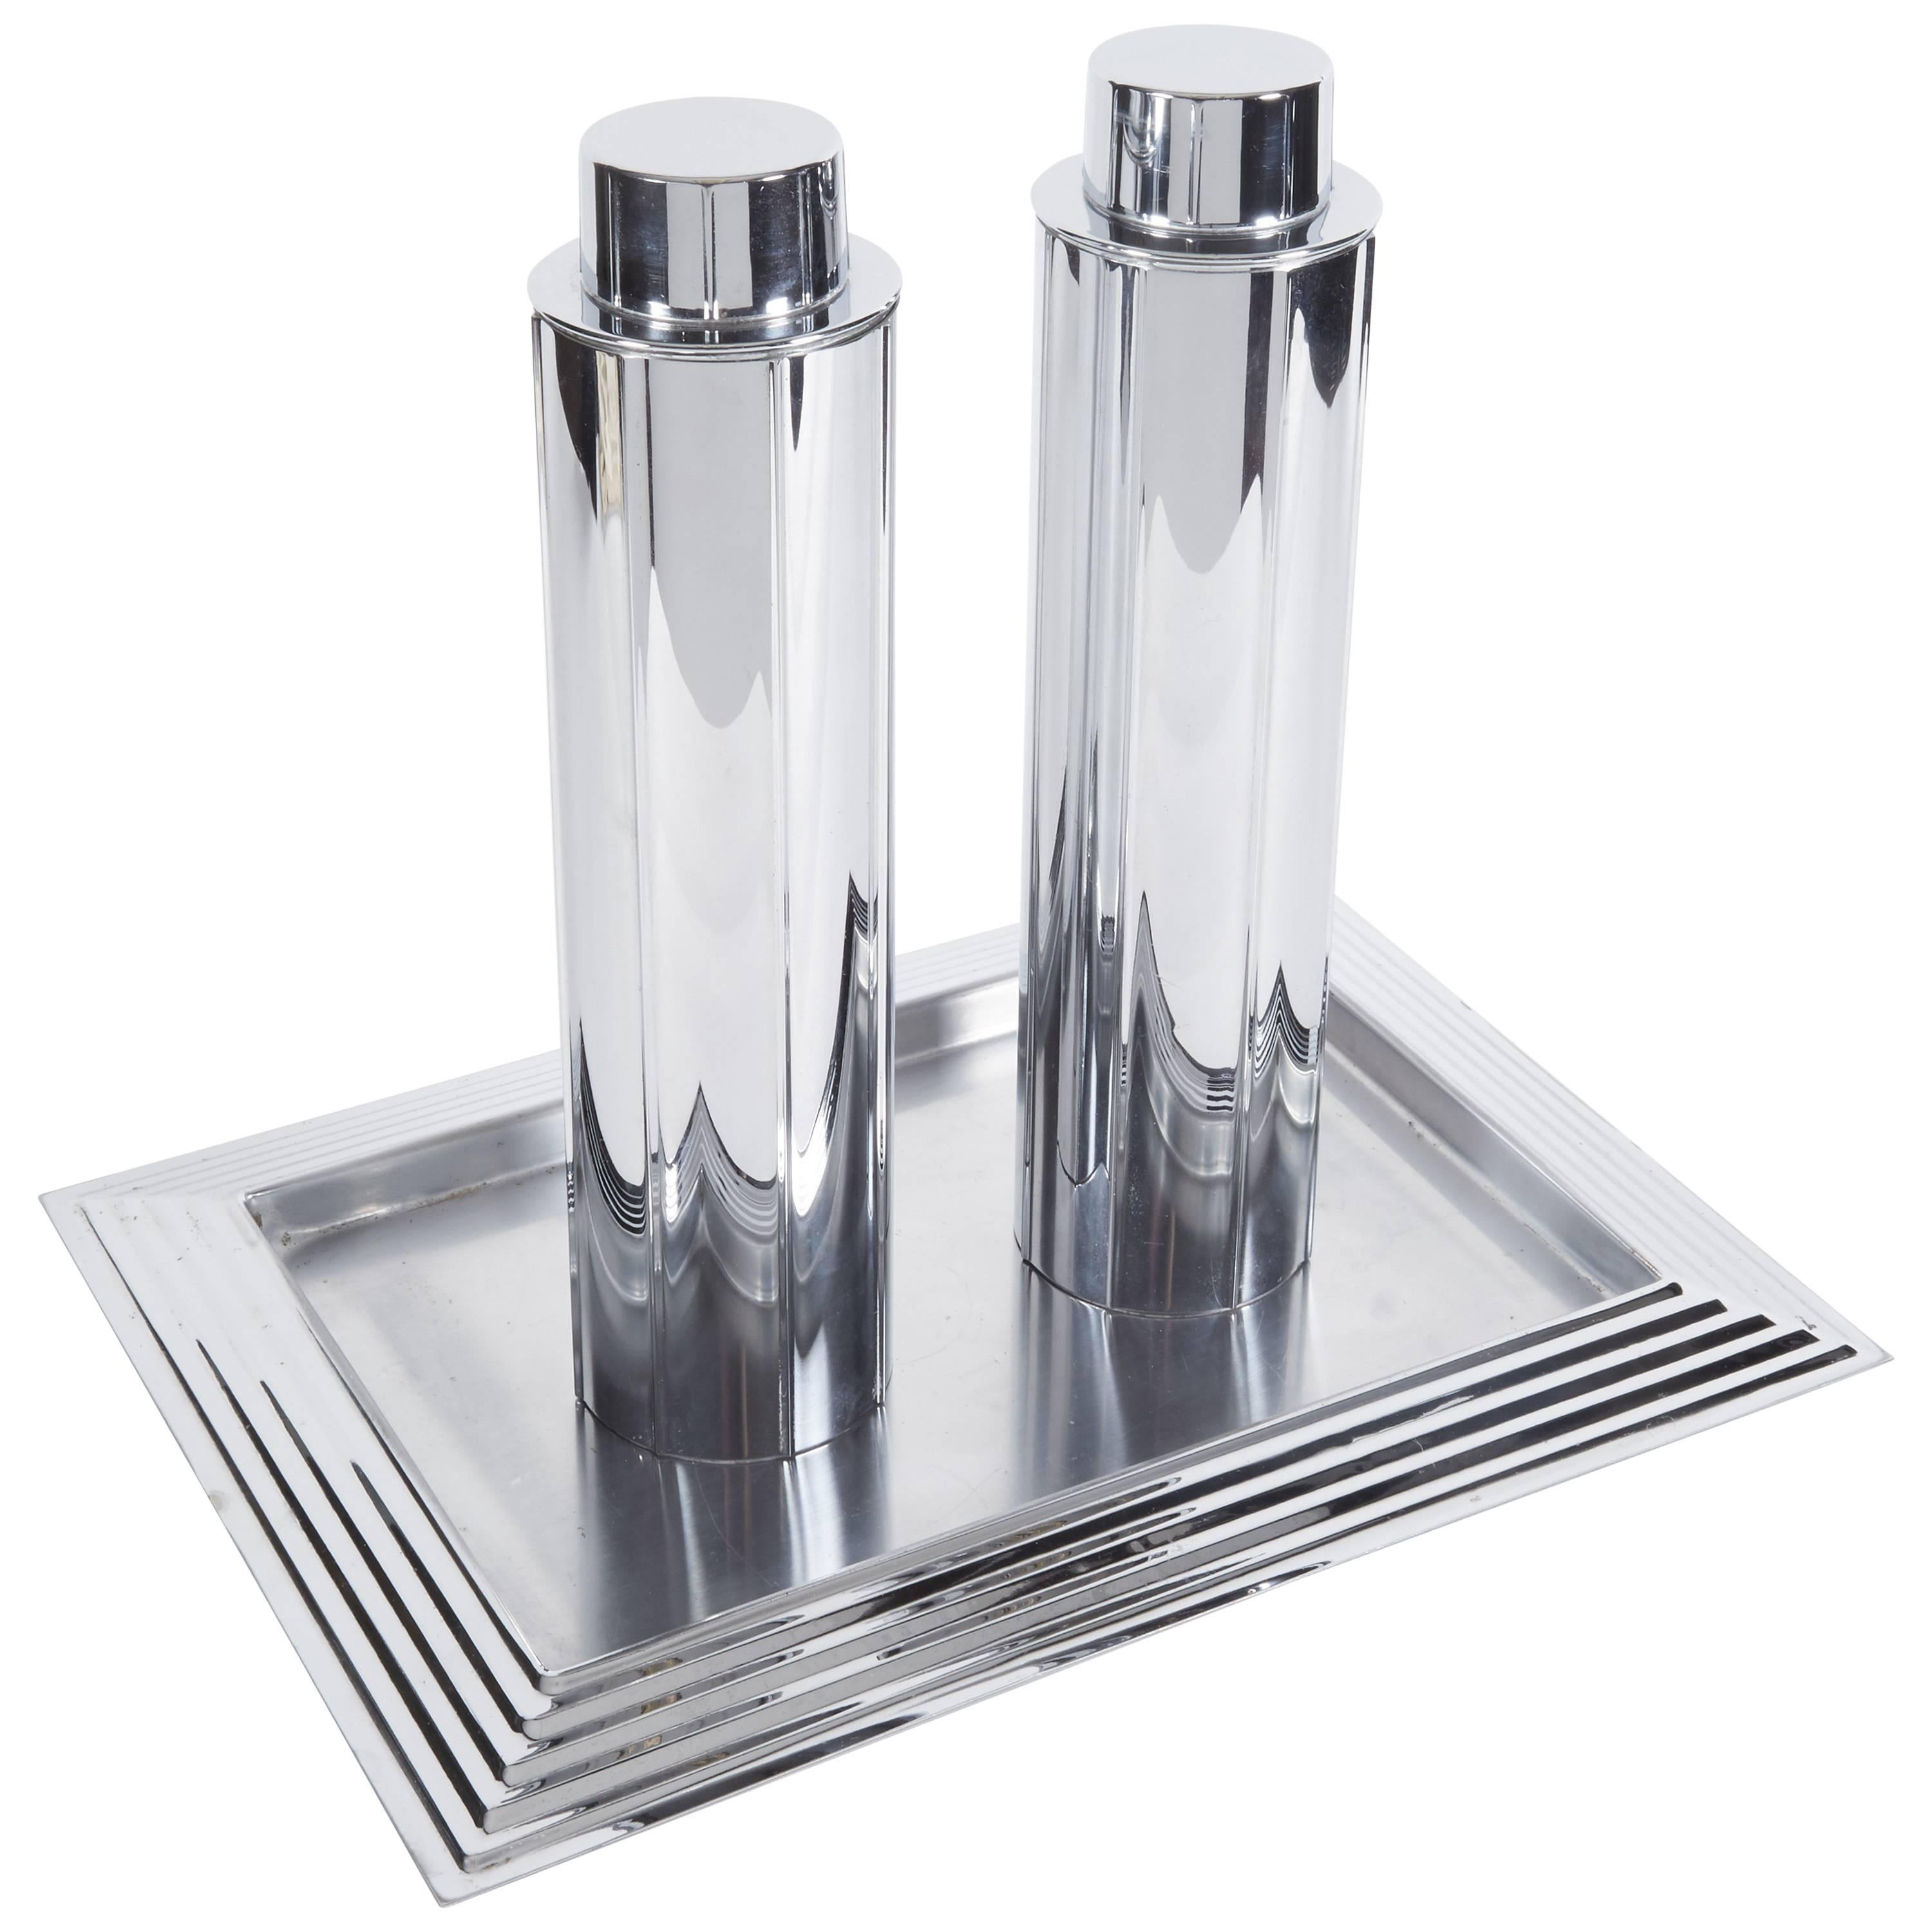 Norman Bel Geddes for Revere, Manhattan Cocktail Shakers and Tray